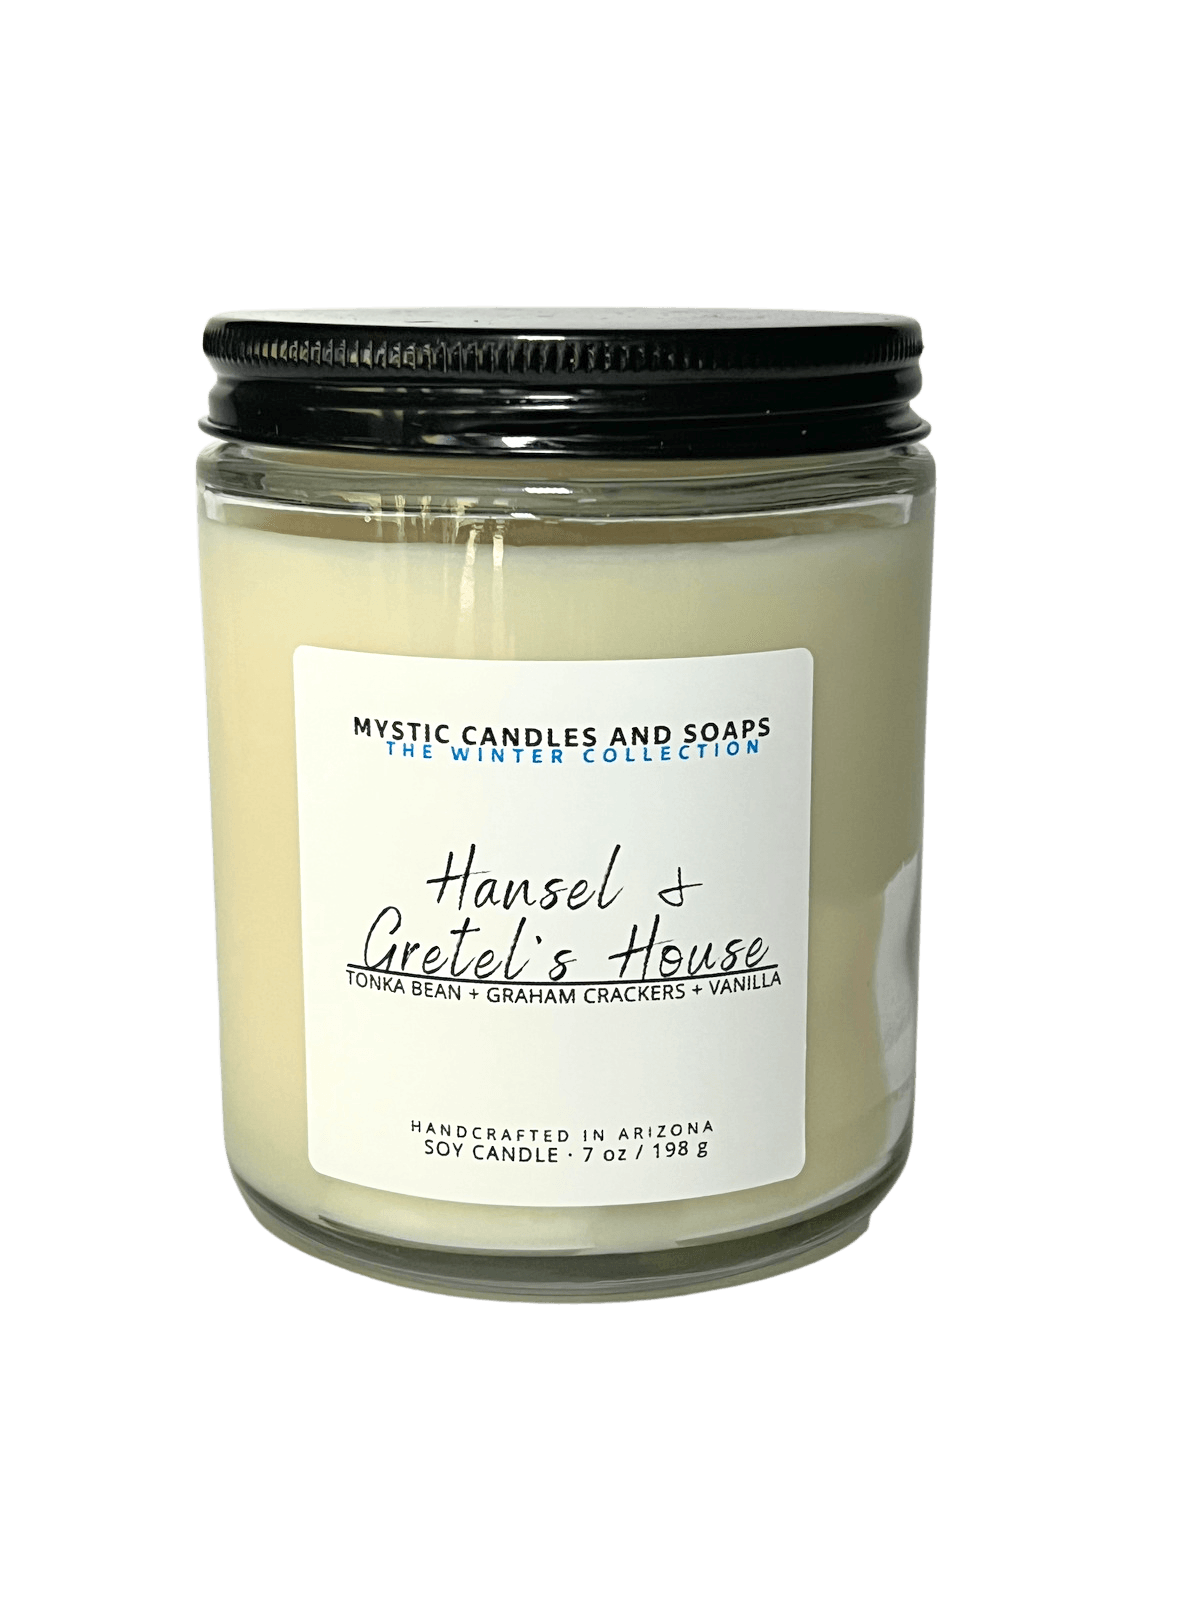 Hansel & Gretel's House Candle - Mystic Candles and Soaps LLC